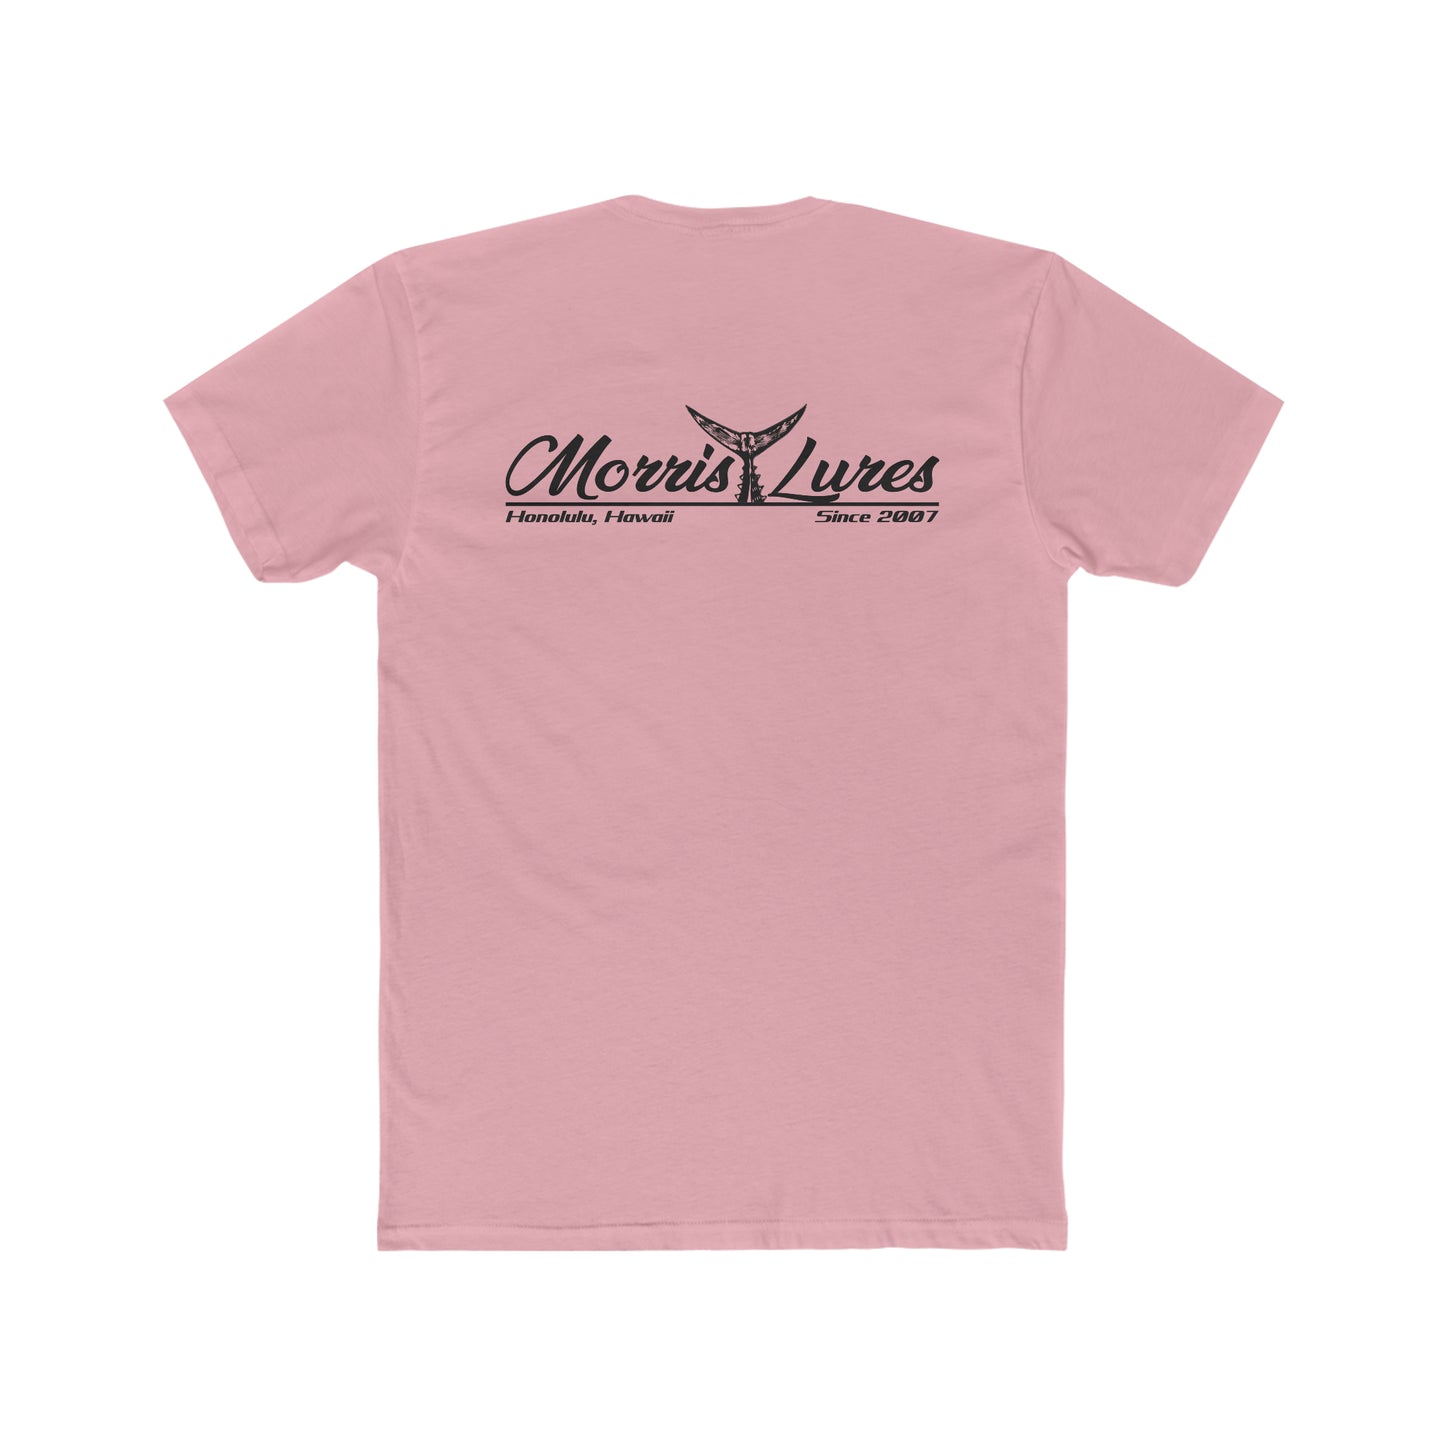 Morris Lures Tails Up T-Shirt